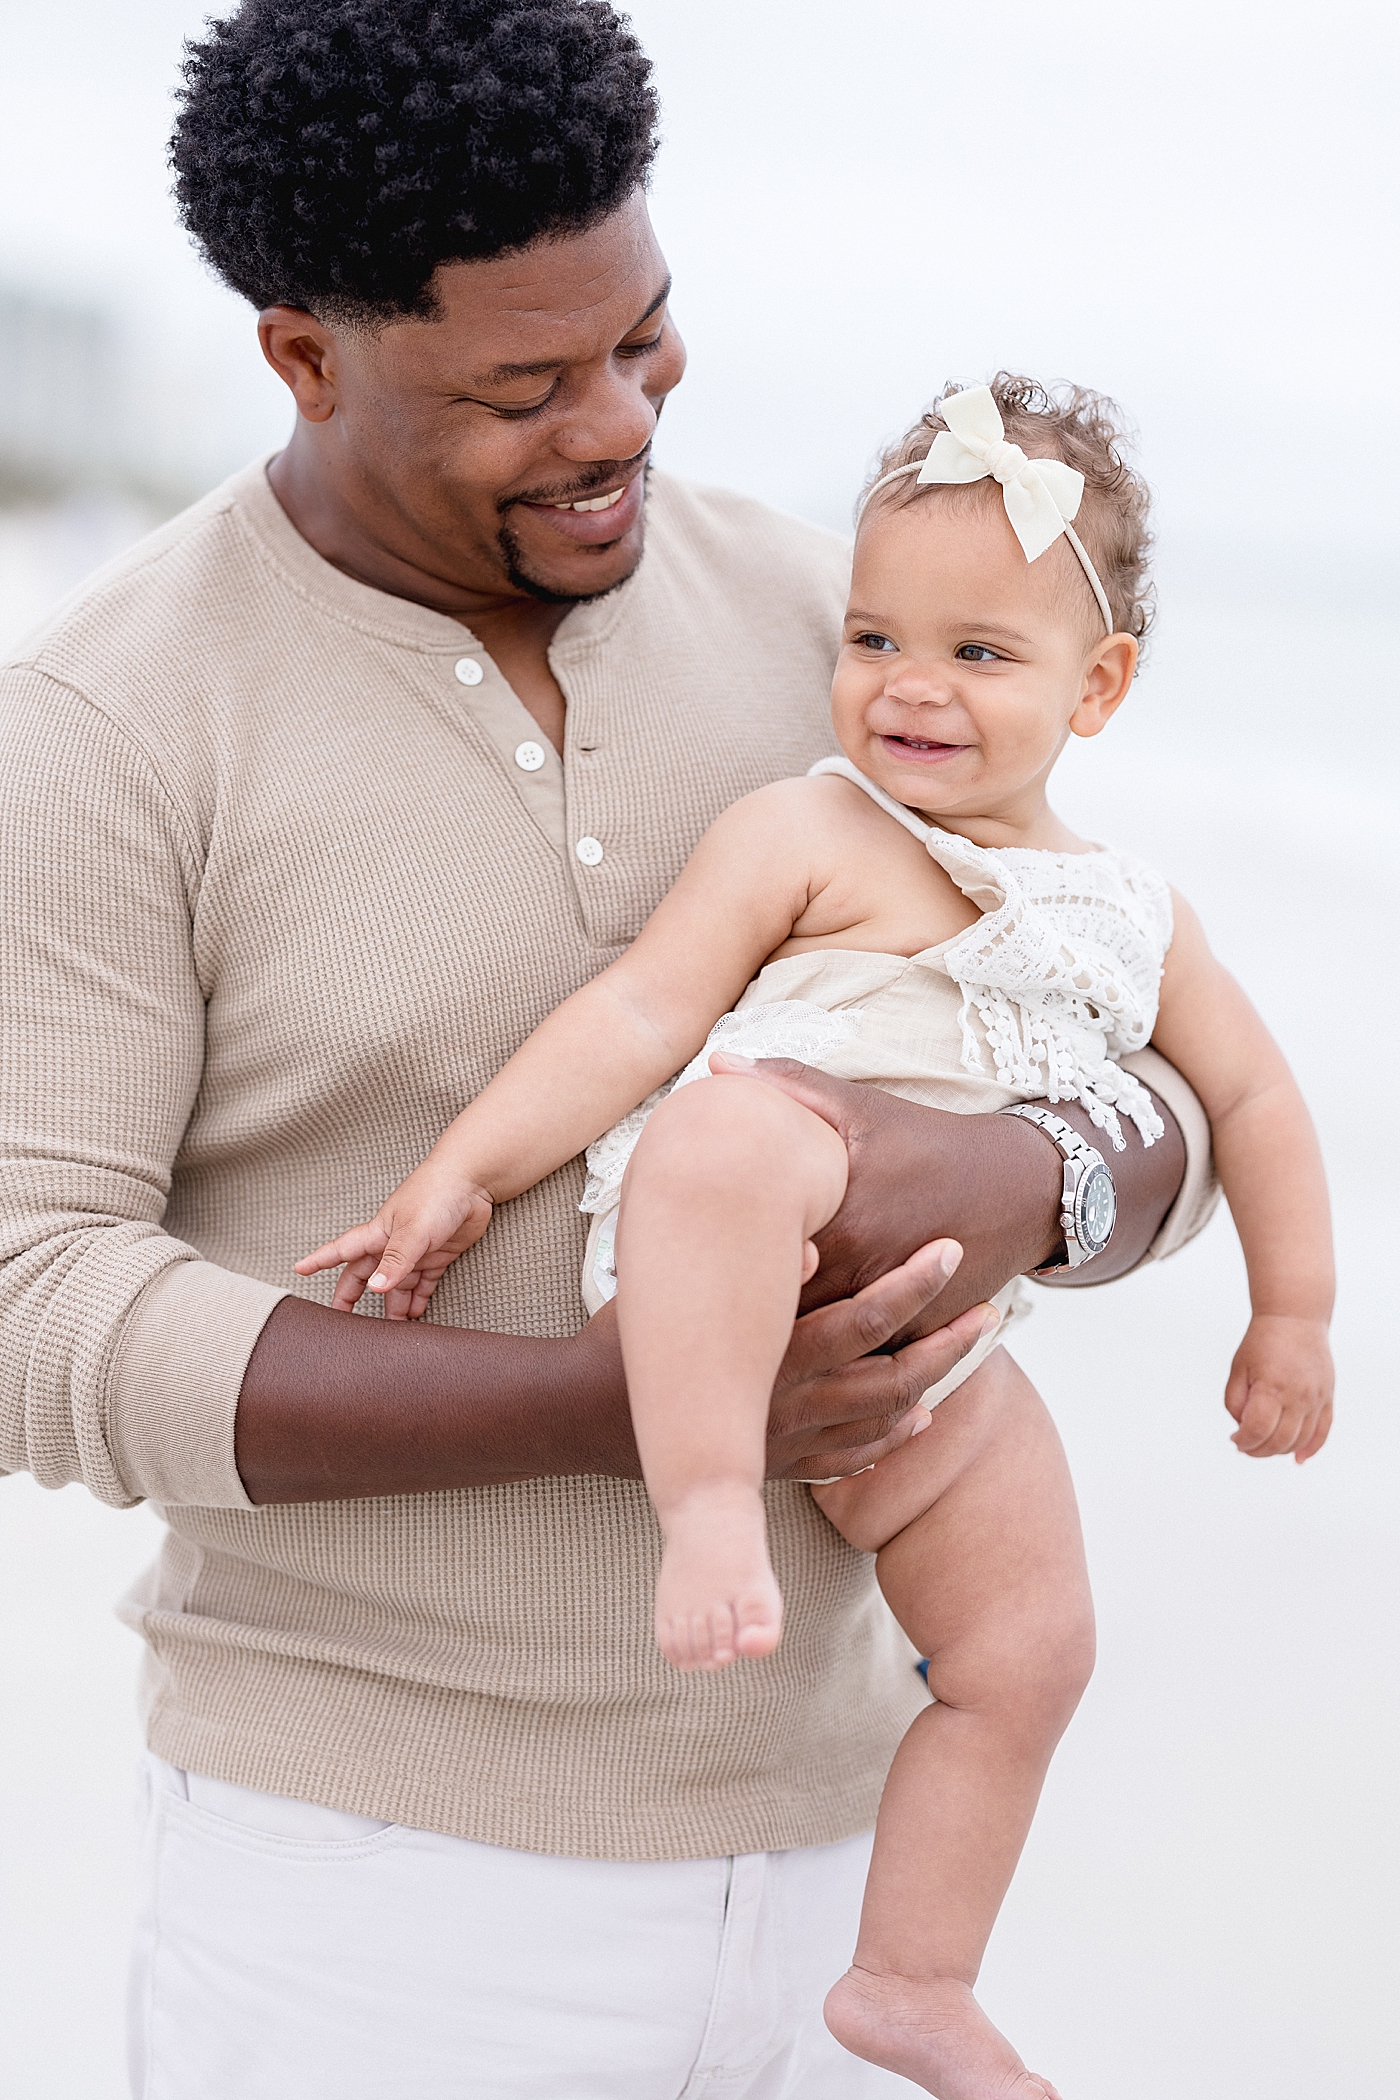 Dad holding his baby girl for her first birthday session on the beach. Photo by Brittany Elise Photography.